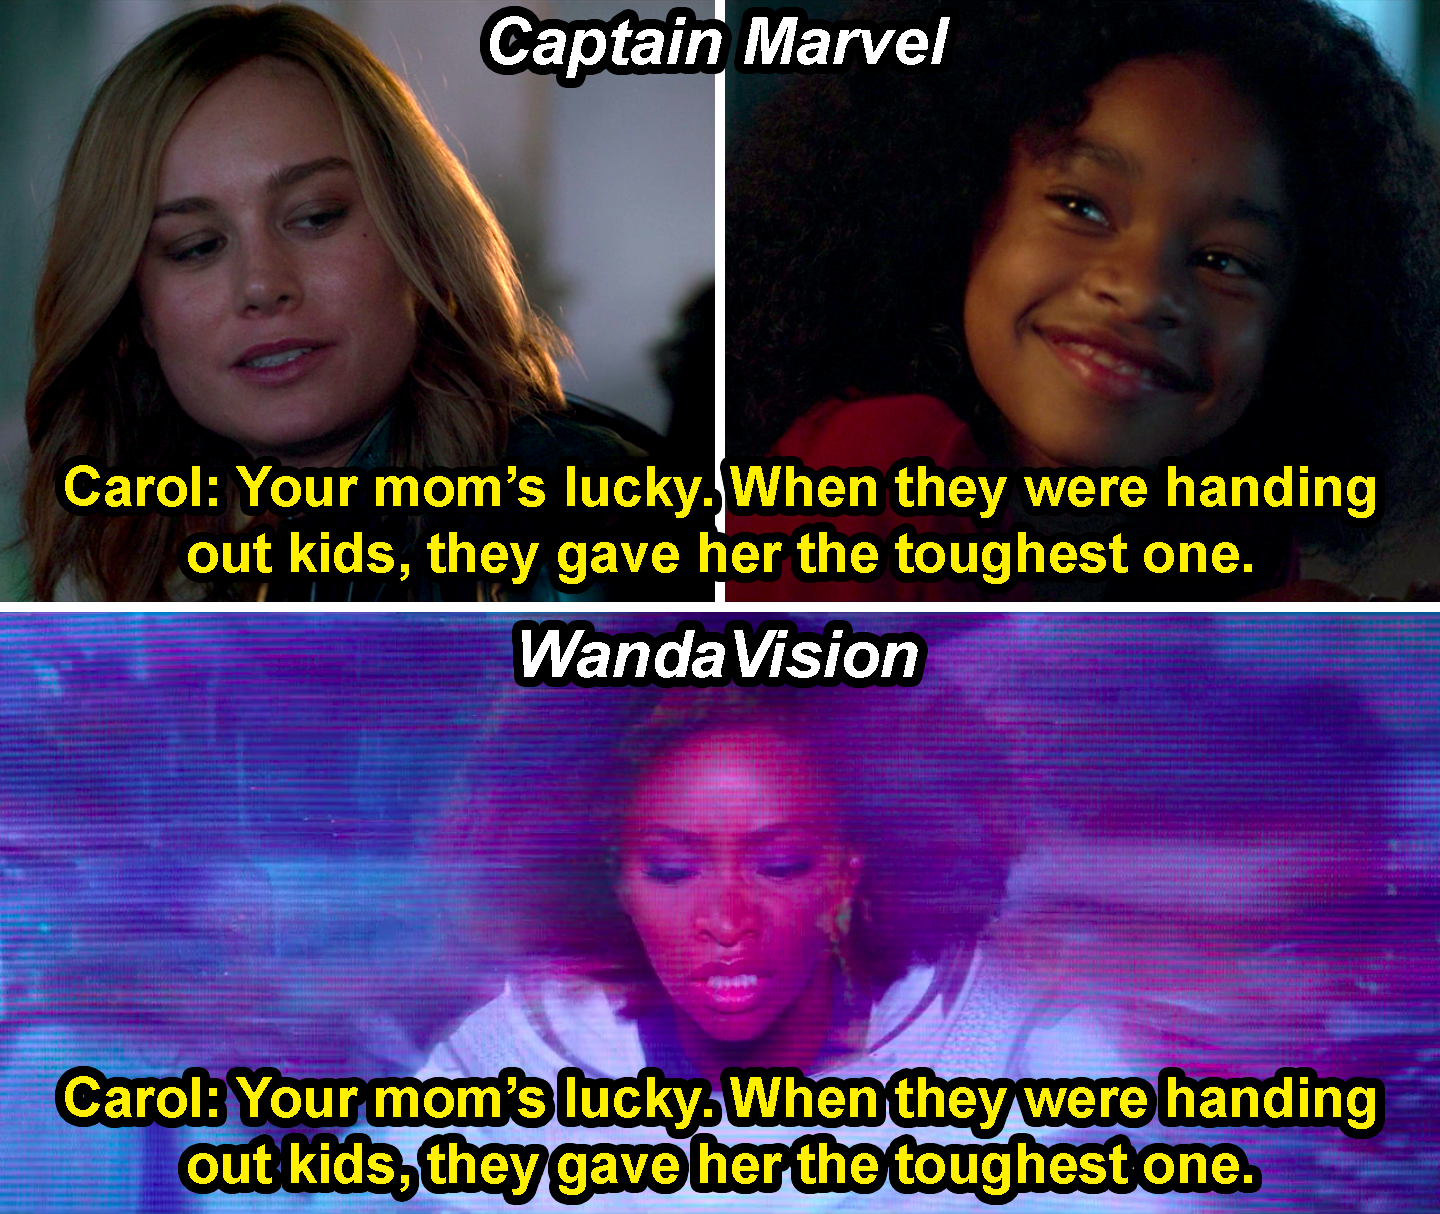 Carol saying, &quot;Your Mom&#x27;s lucky, when they were handing out kids, they gave her the toughest one,&quot; to Monica in Captain Marvel and then Monica hearing it in WandaVision